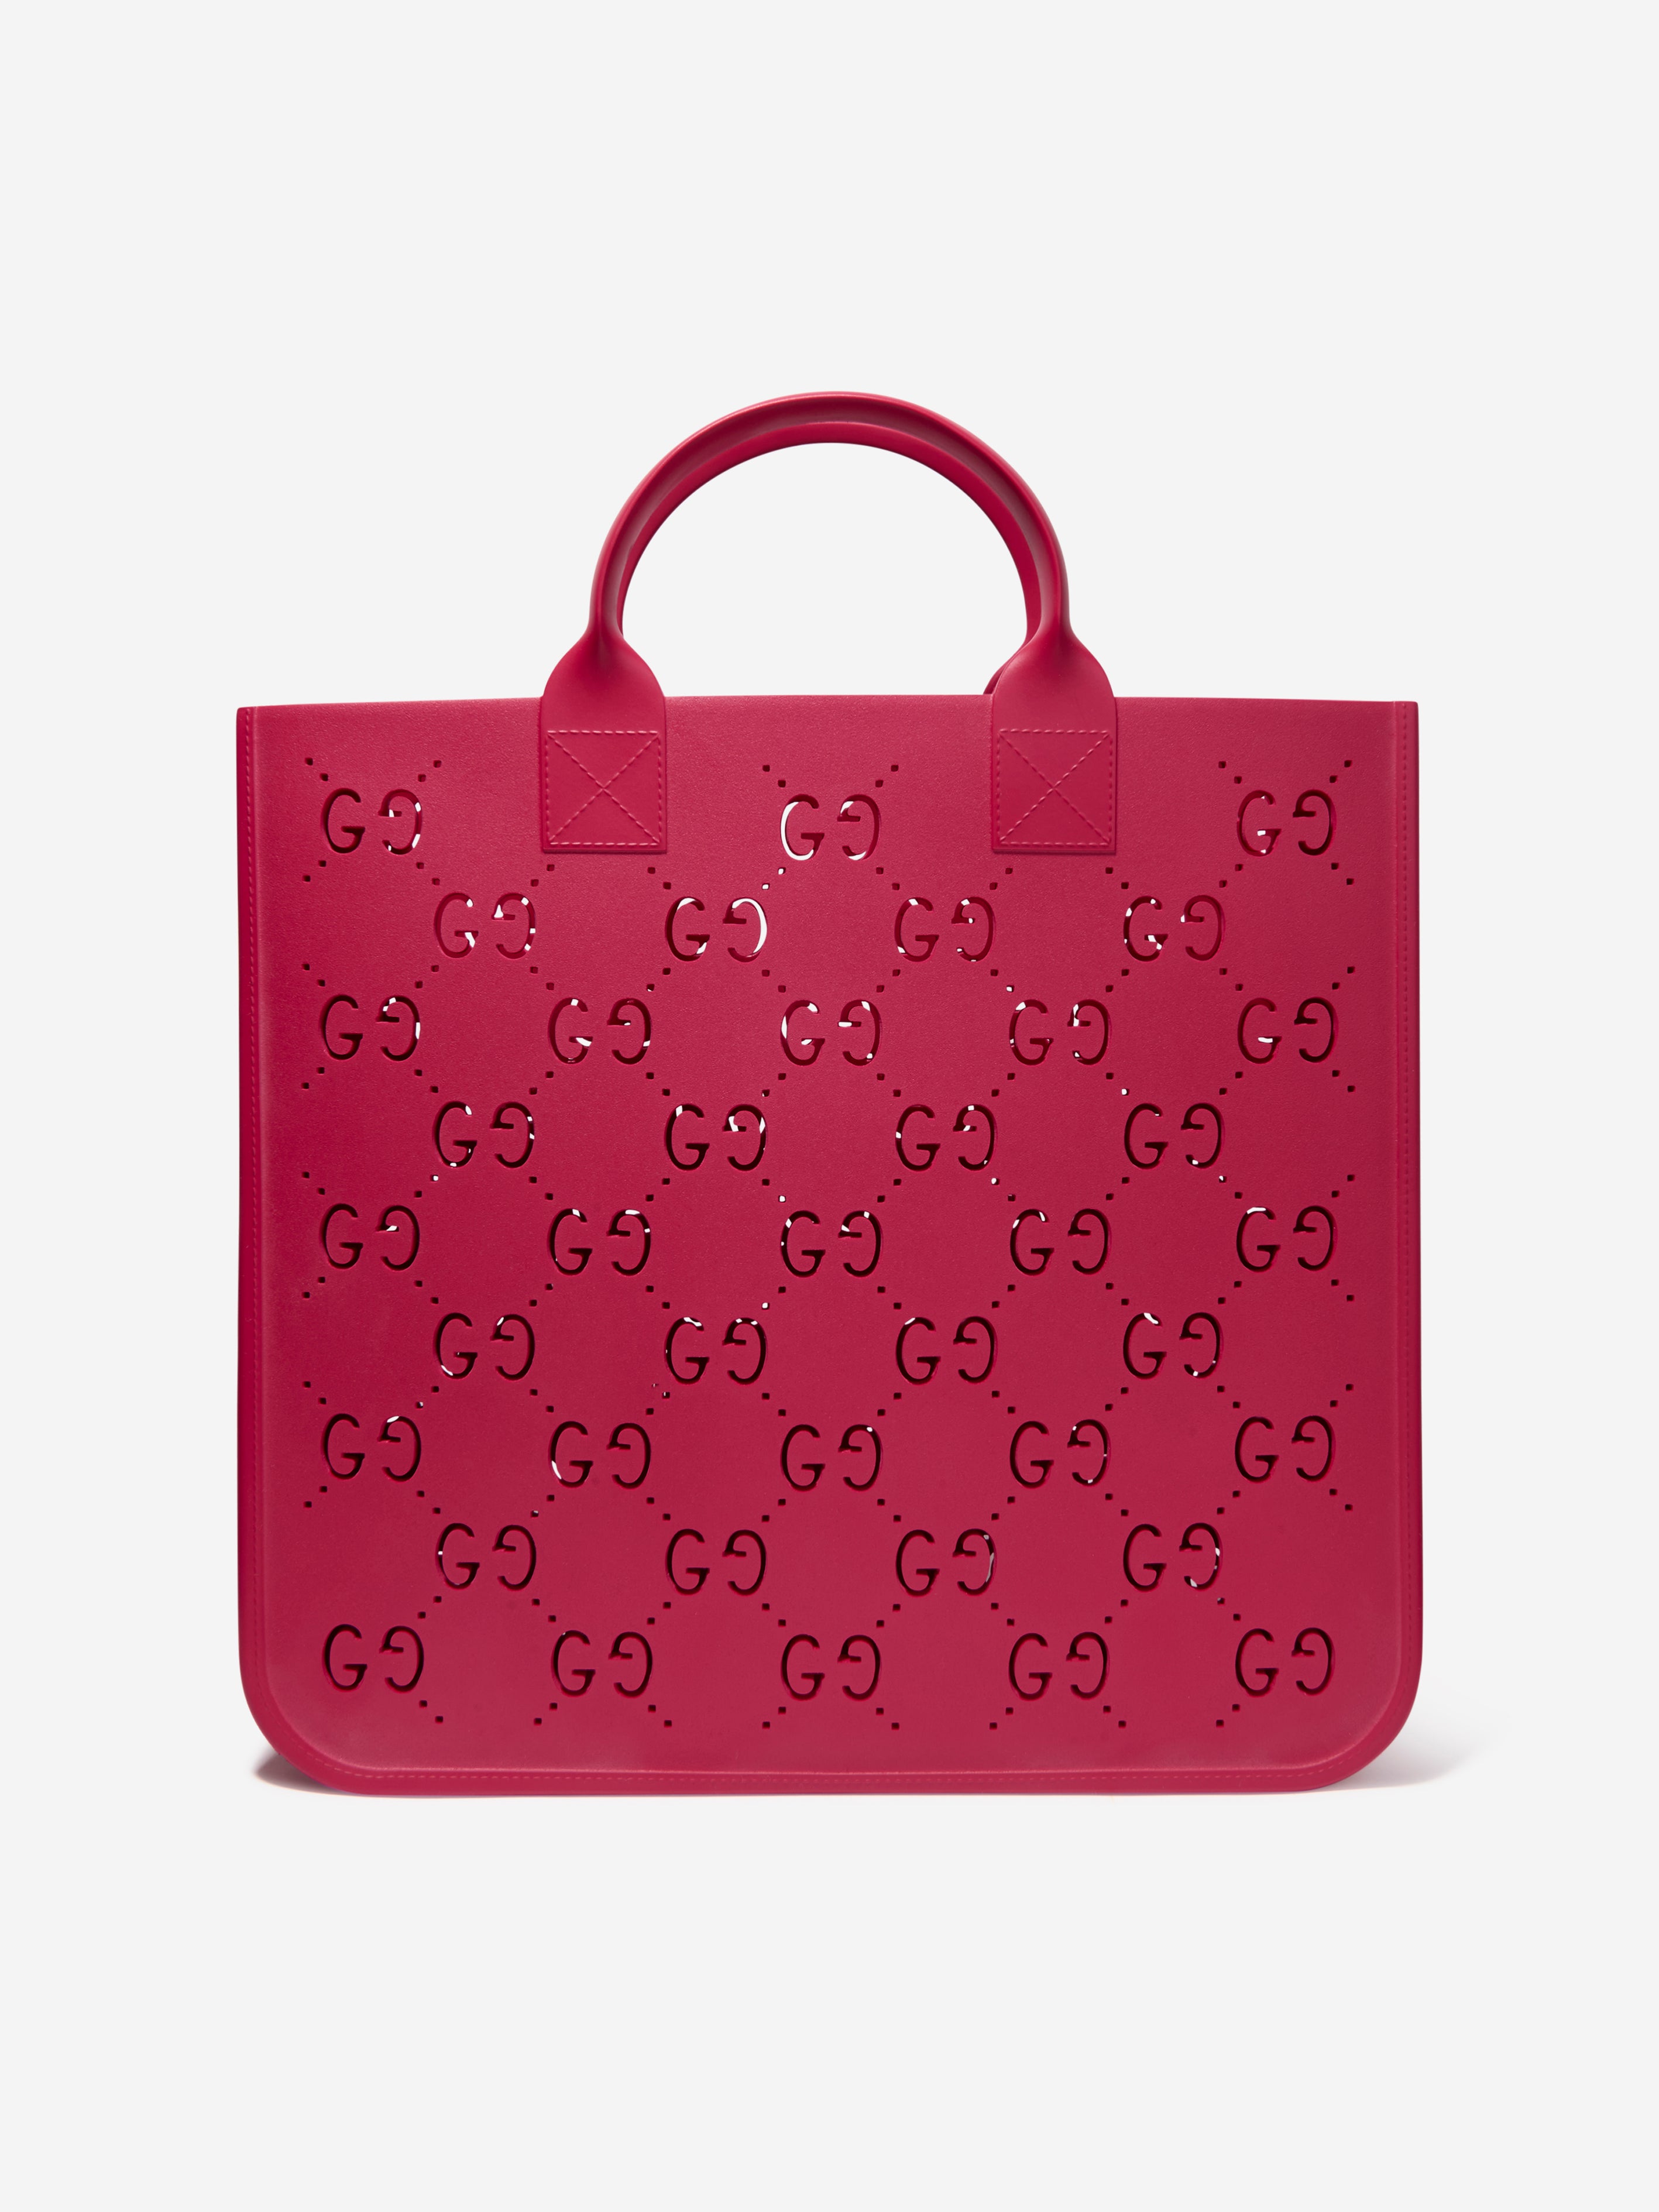 Gucci Girls GG Tote Bag (33cm) Girls Kids One Size Pink Rubber by Childrensalon